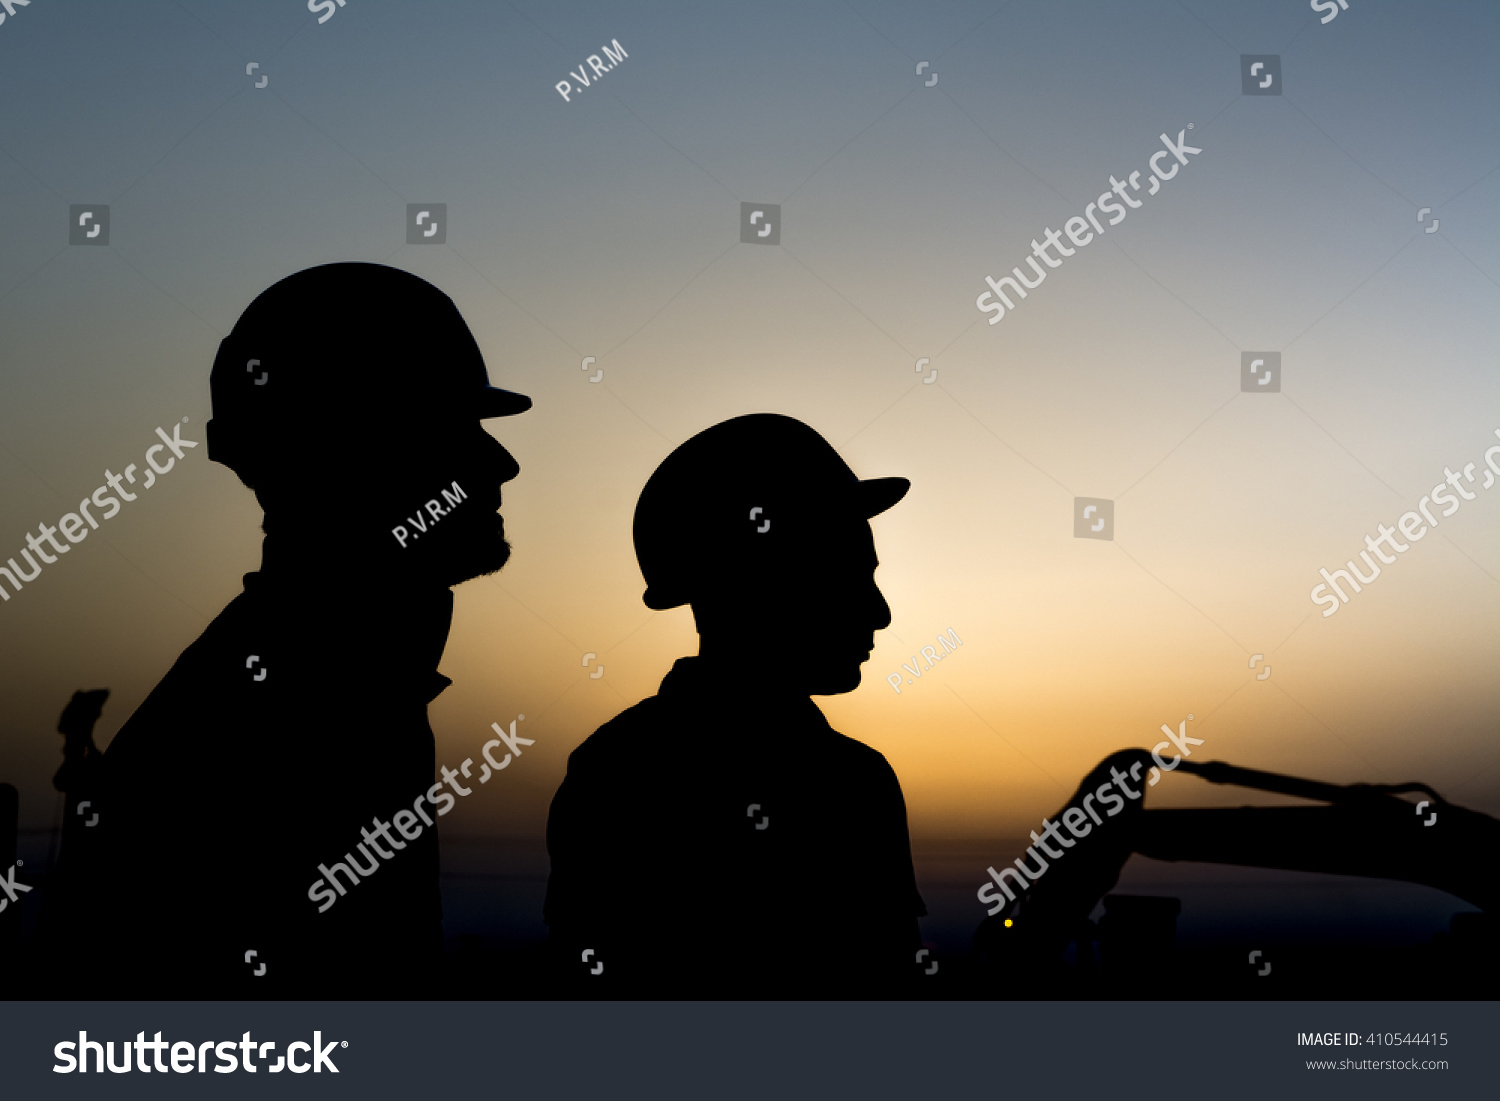 Silhouette of construction workers at construction site in oilfield - Blur background with heavy lifting equipment - Sunset.    #410544415